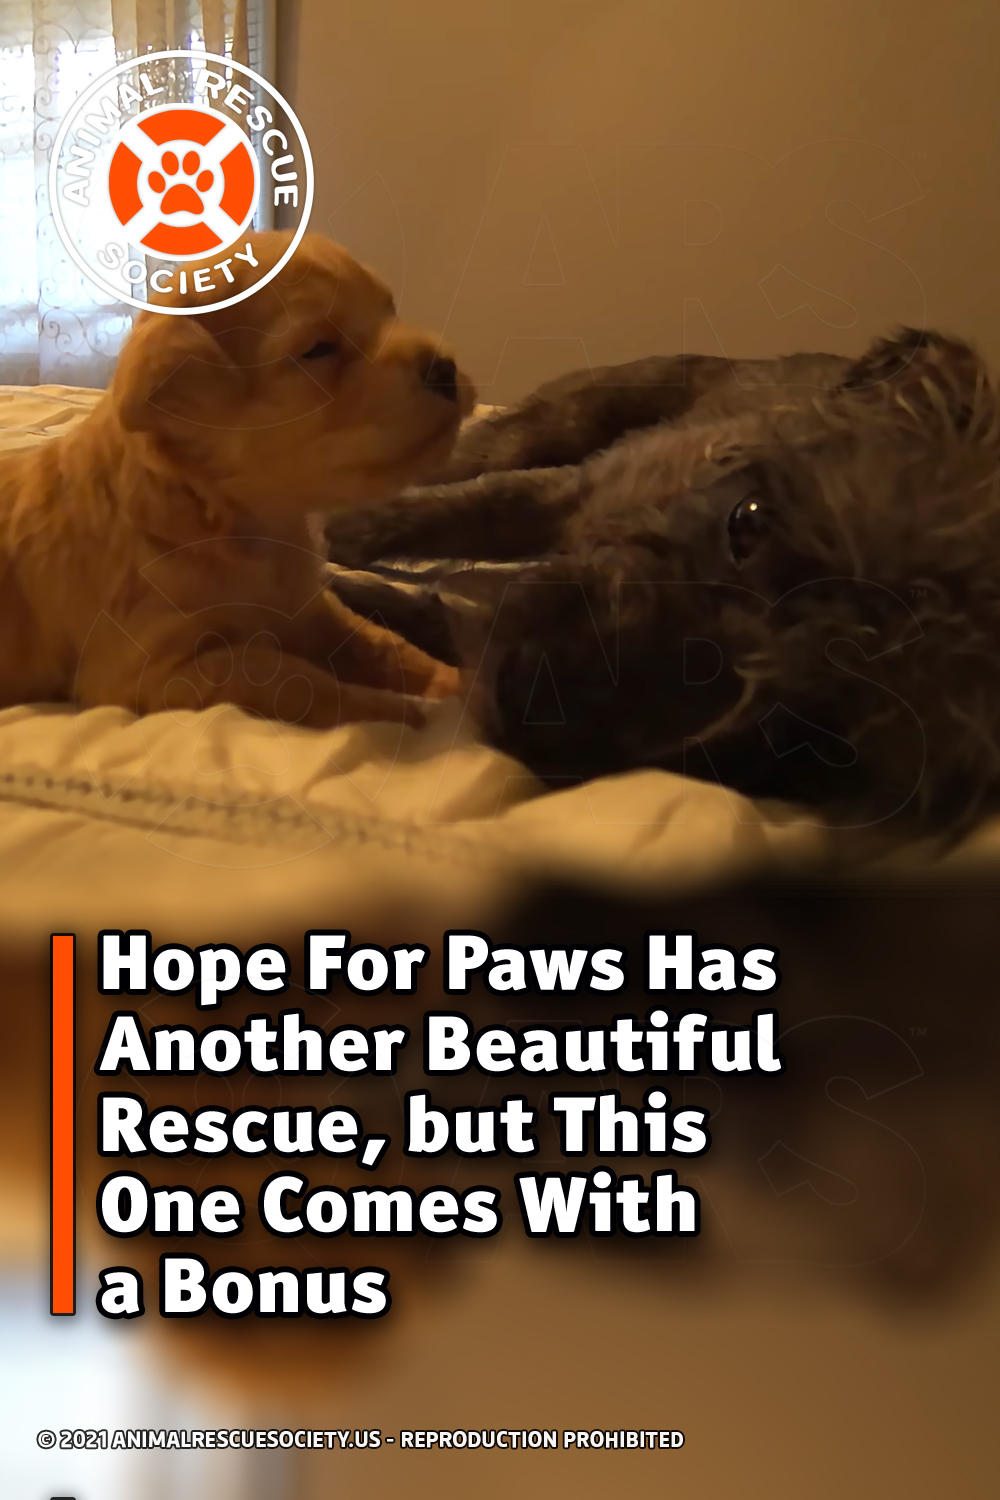 Hope For Paws Has Another Beautiful Rescue, but This One Comes With a Bonus